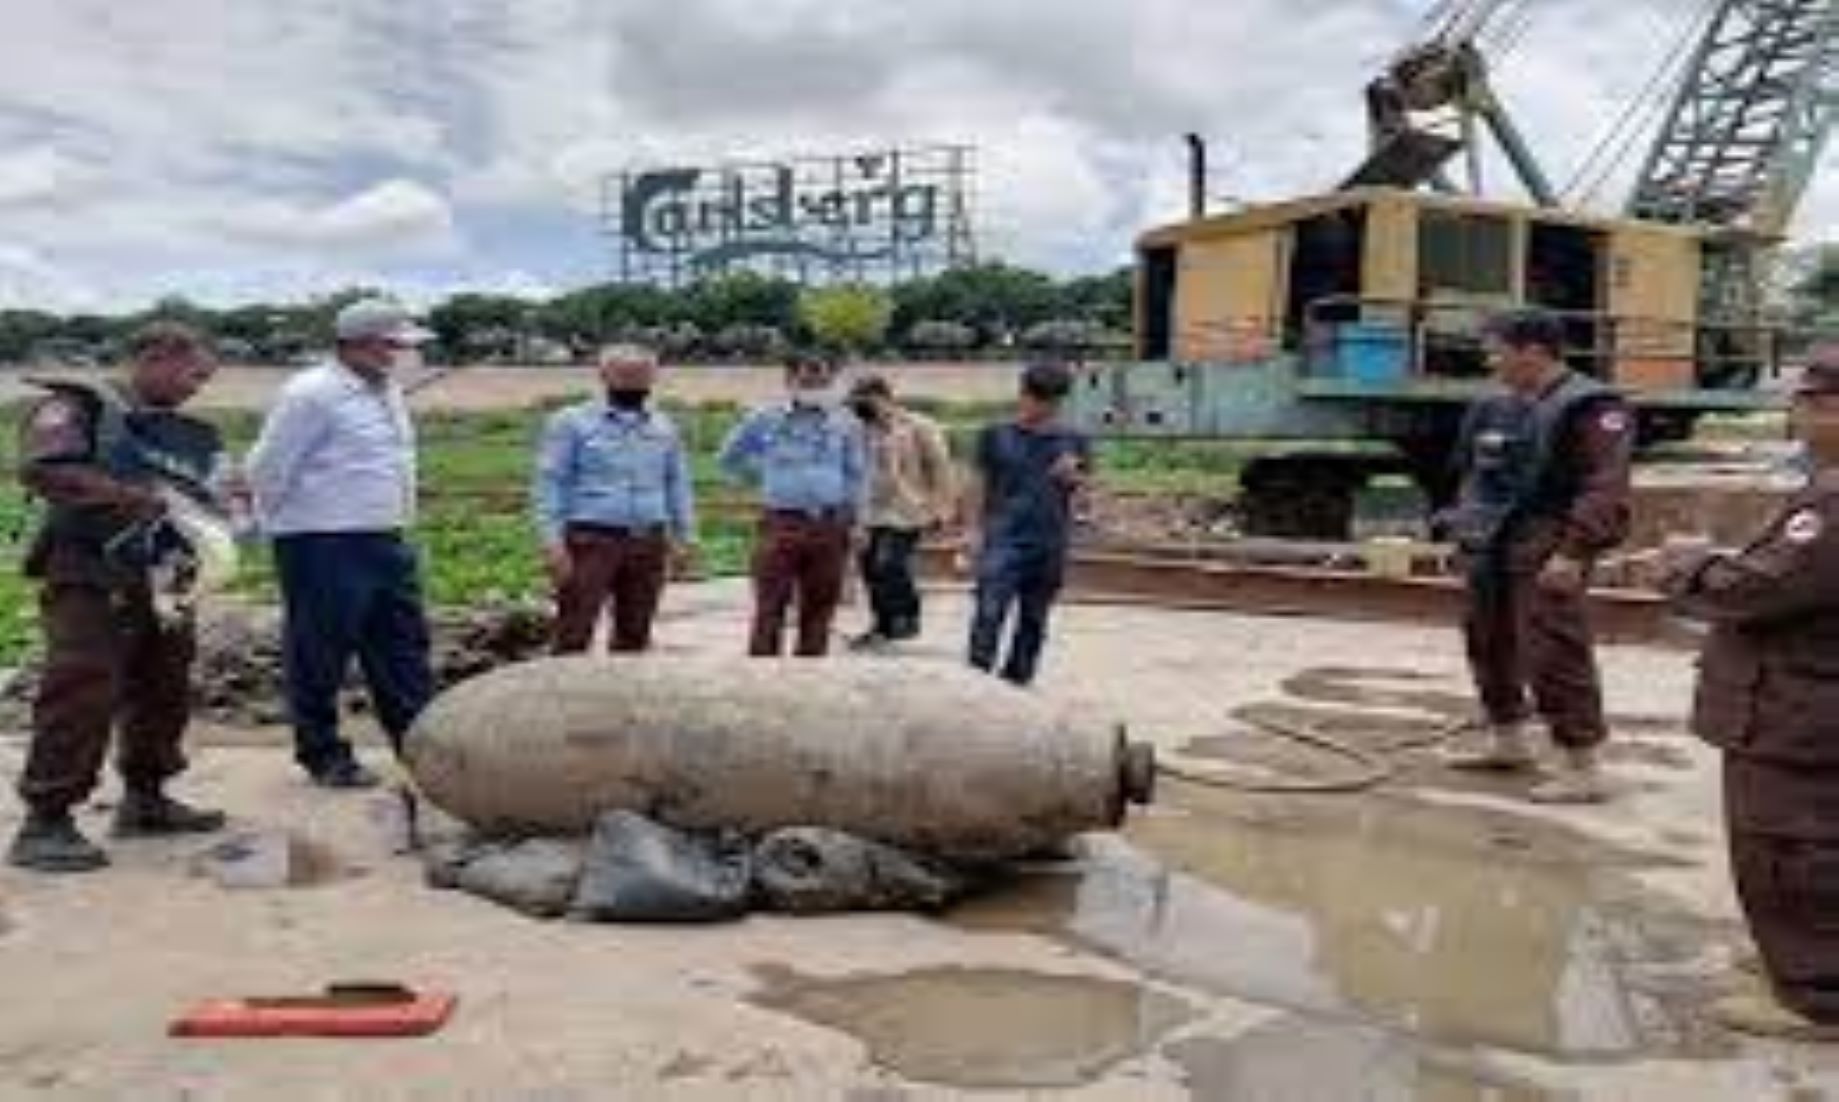 War-Remnant U.S. Aerial Bombs Safely Removed In Cambodia: Official